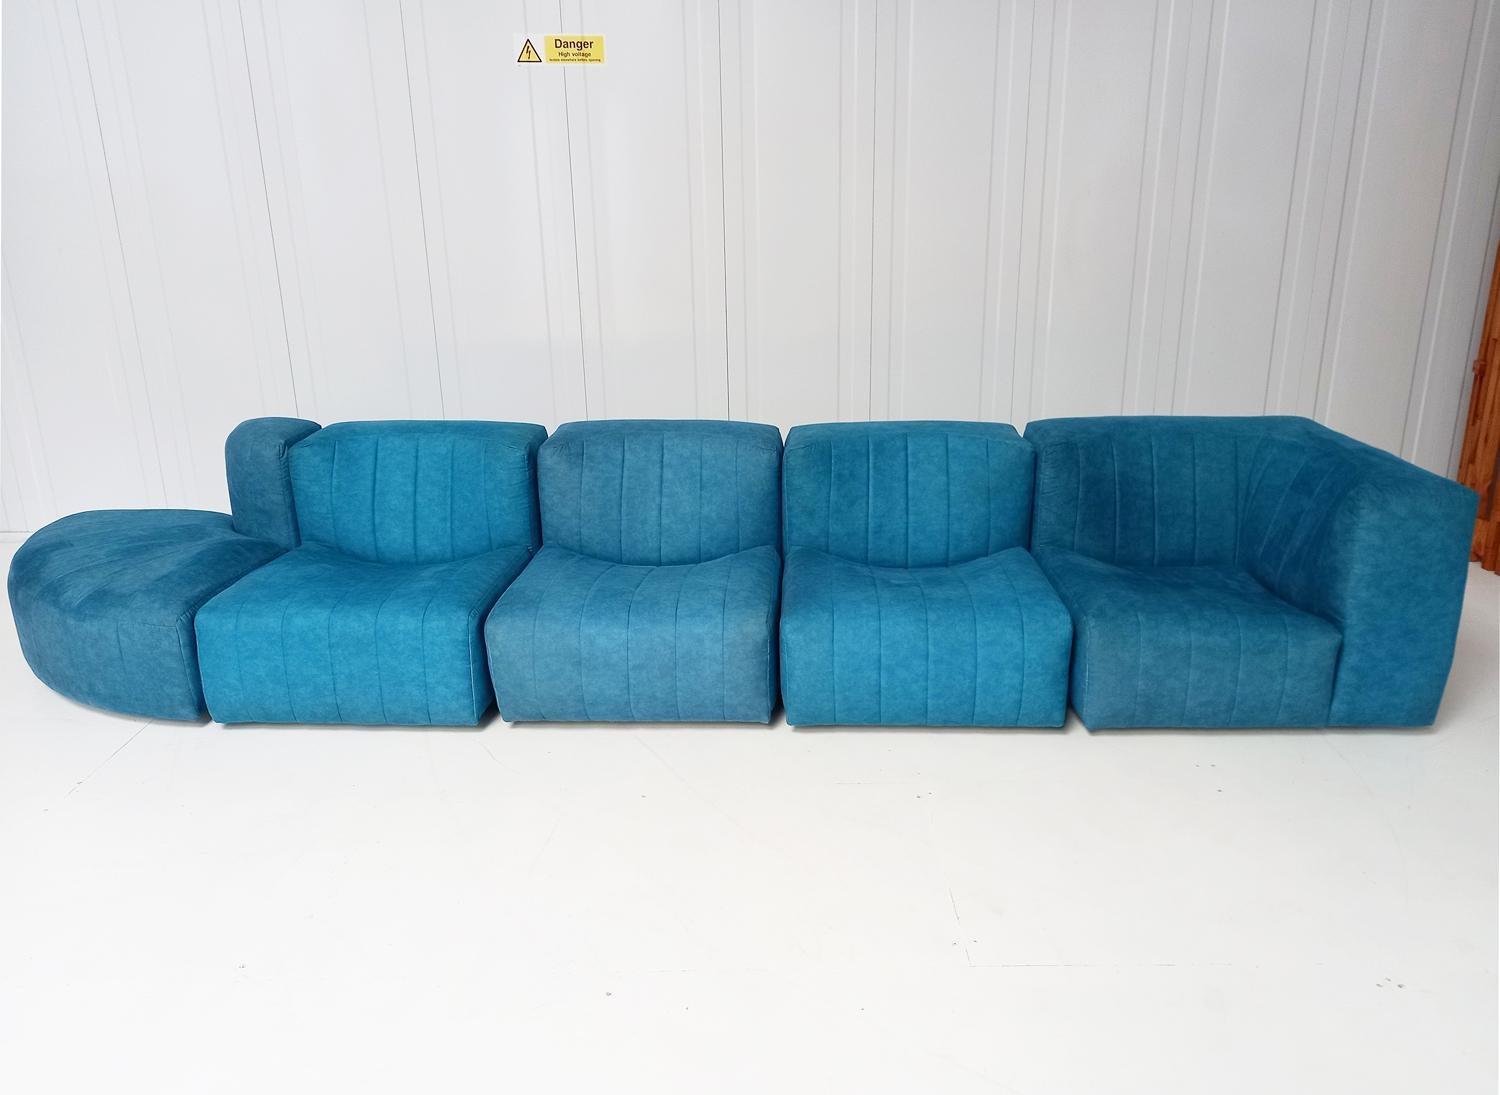 20th Century Tito Agnoli for Arflex Sectional Sofa Model '9000' in Blue Upholstery For Sale